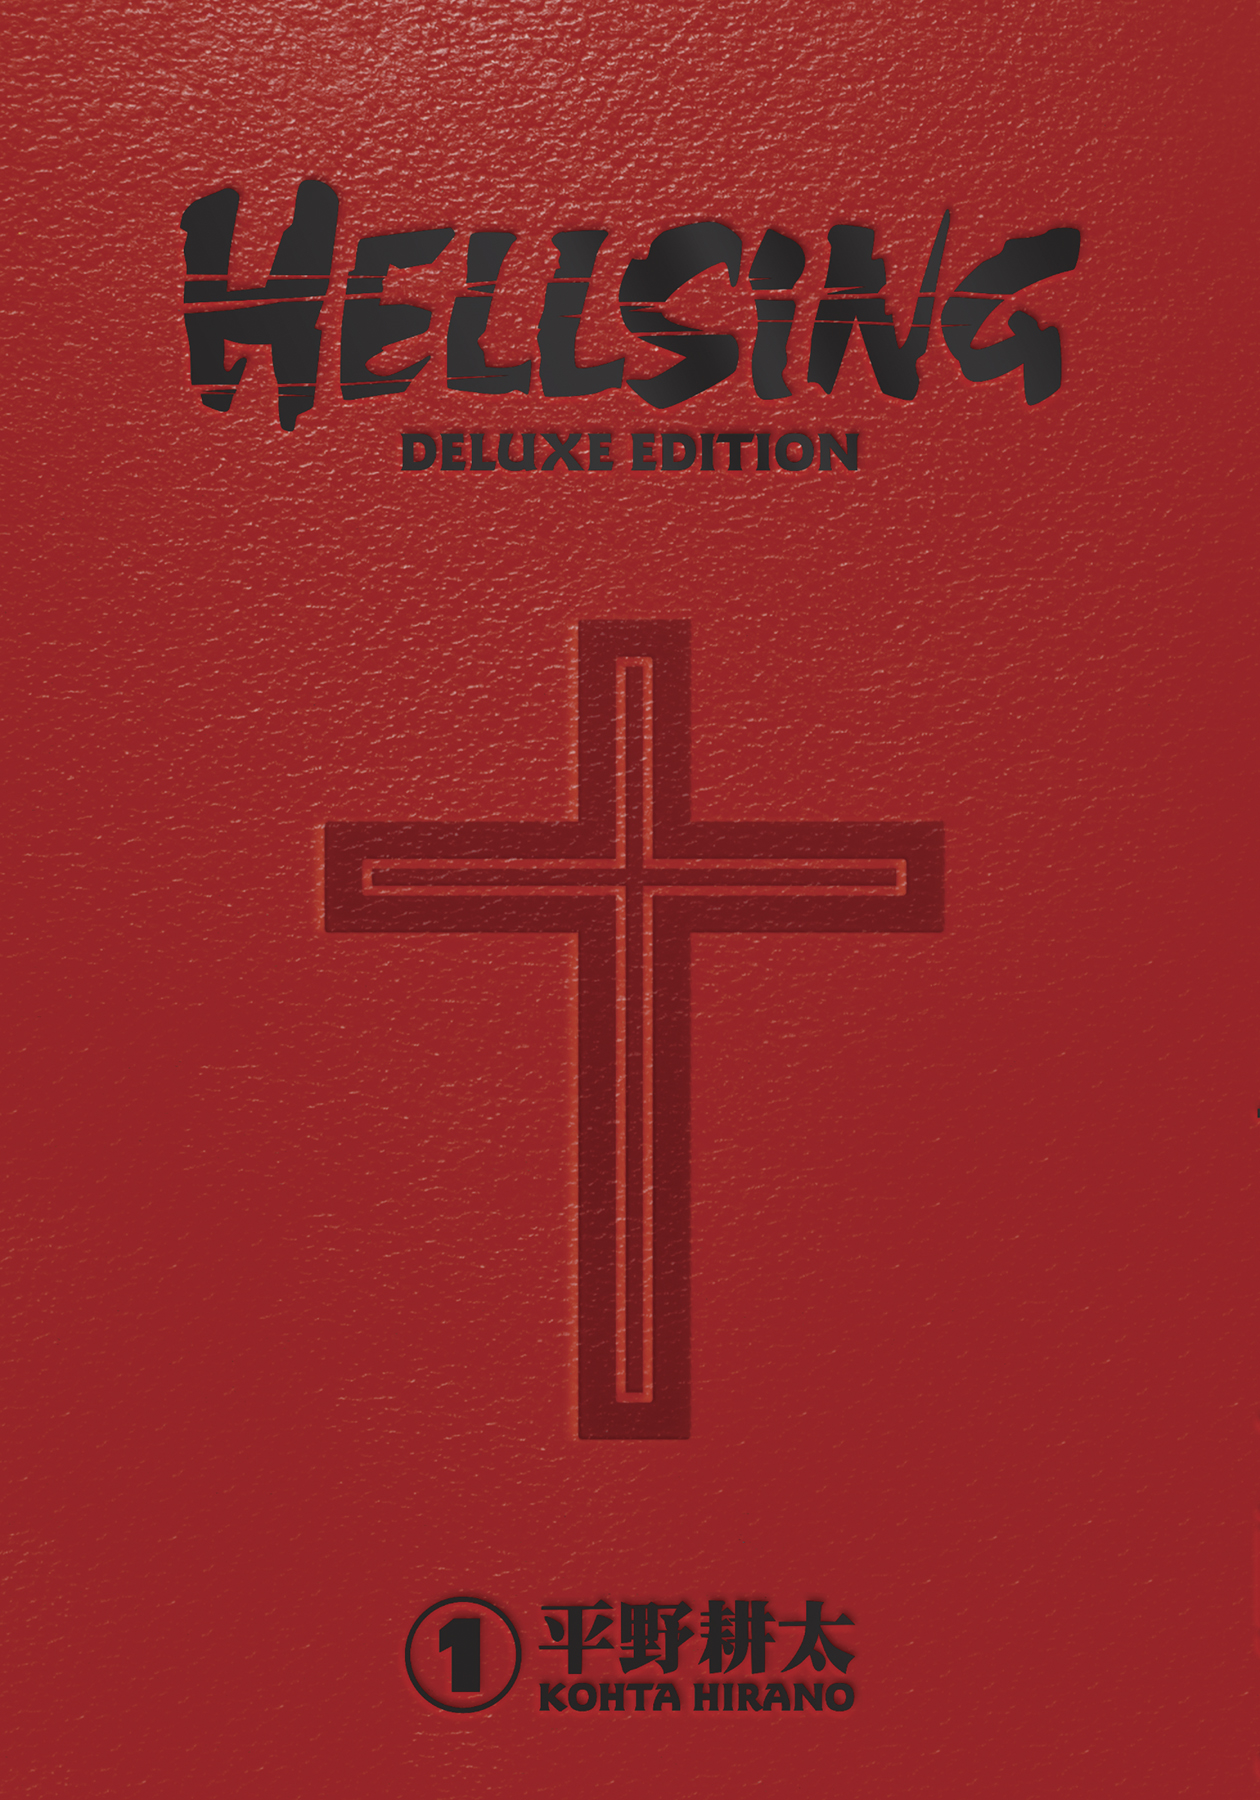 Hellsing Deluxe Edition Hardcover Volume 1 (Mature)